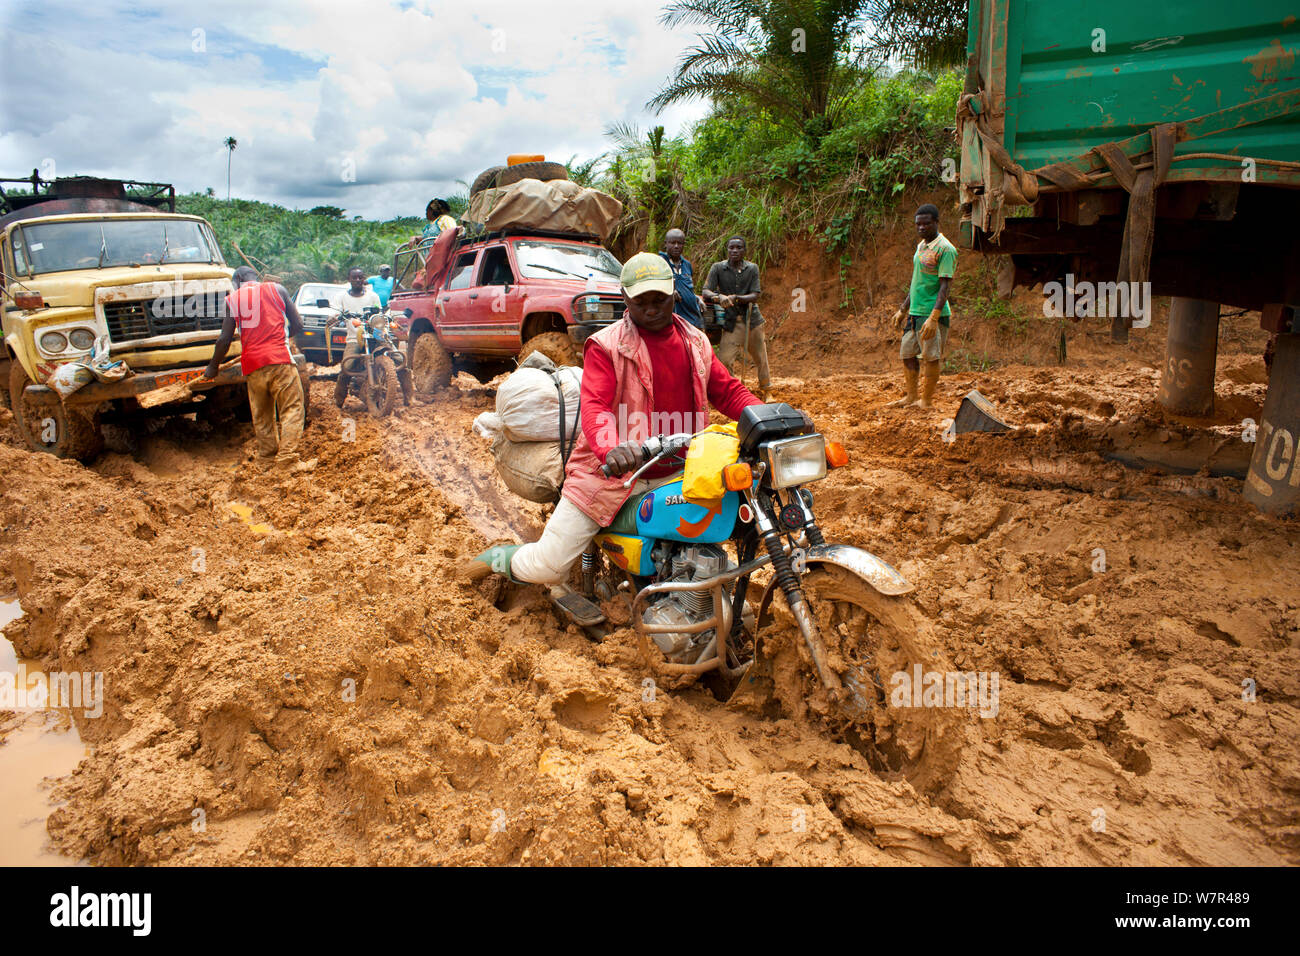 Vehicles stuck in deep mud - the onset of the rainy season deteriorates dirt roads making transport difficult, Cameroon, August 2009. Stock Photo